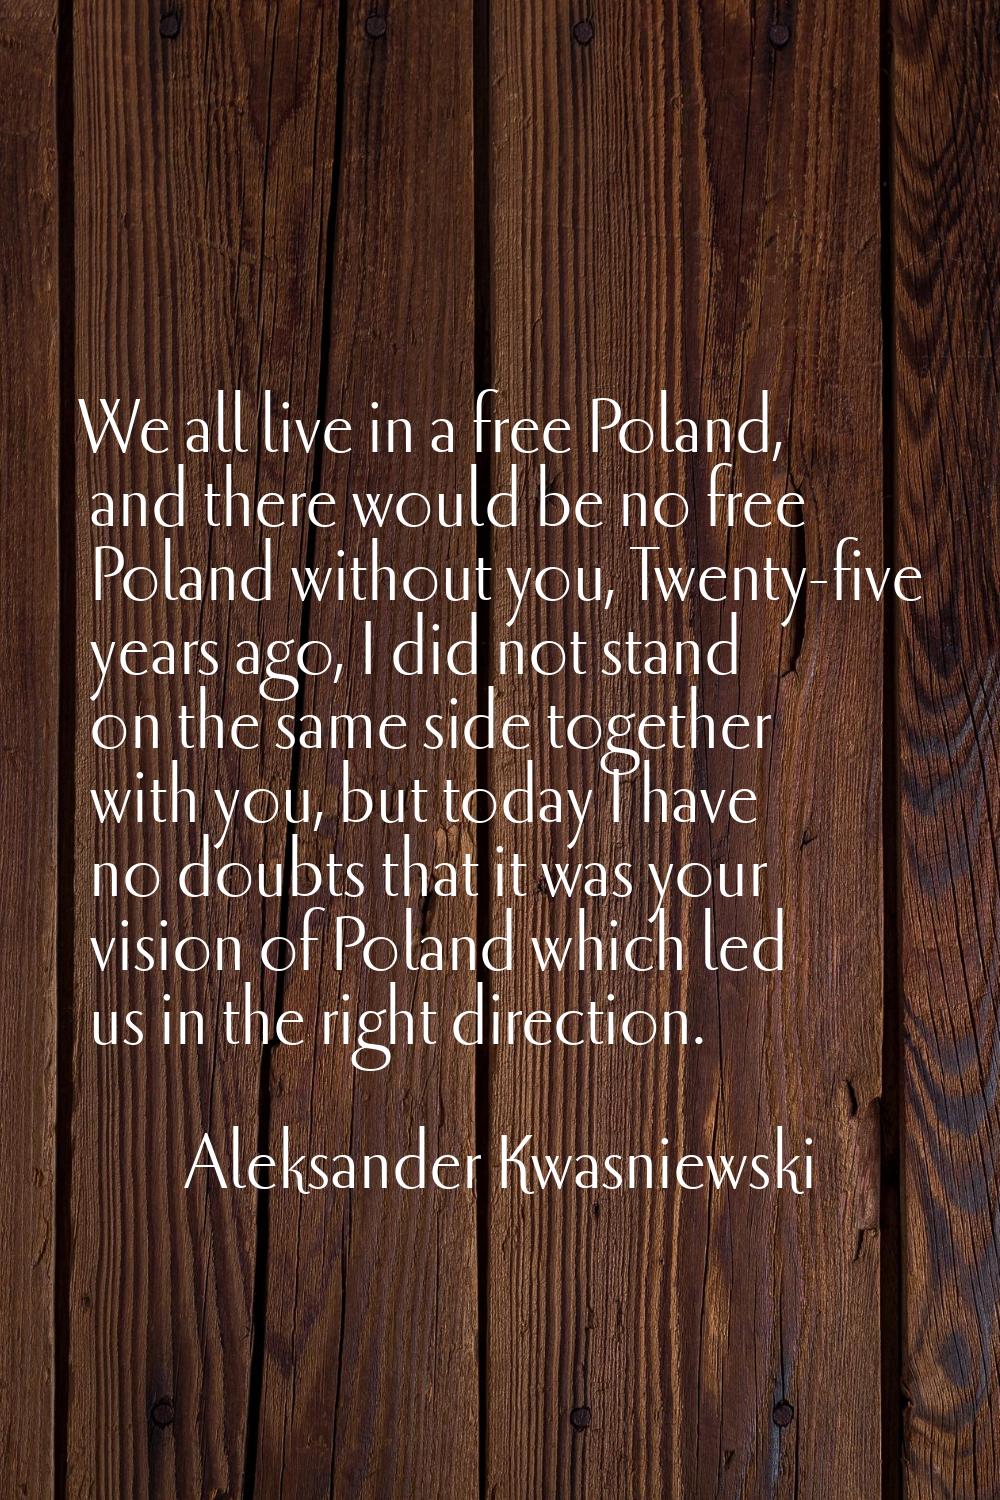 We all live in a free Poland, and there would be no free Poland without you, Twenty-five years ago,